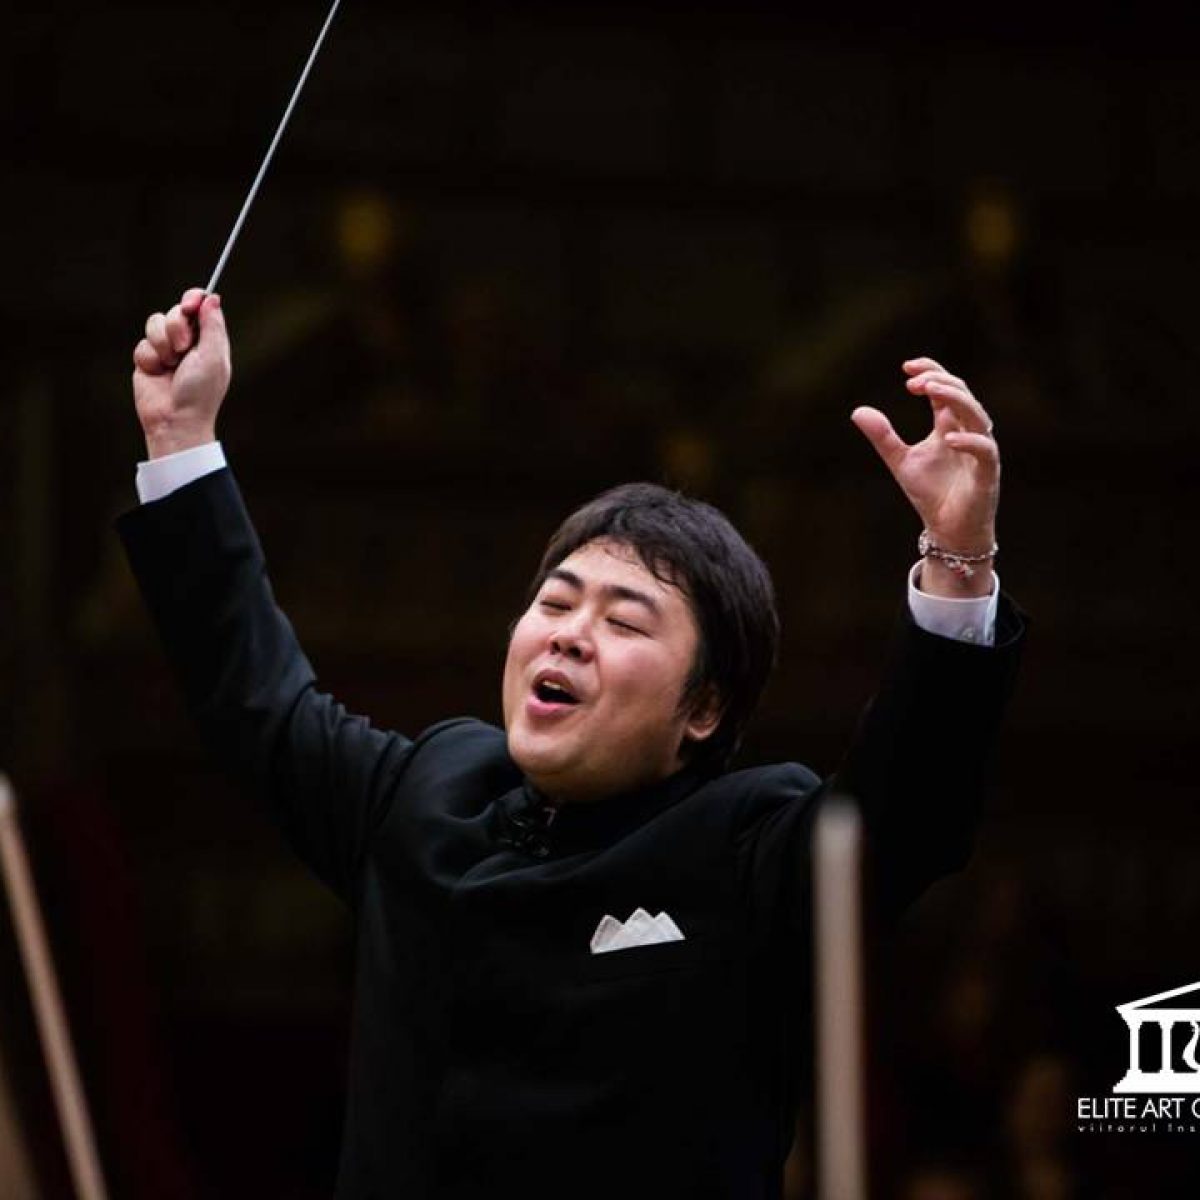 6th International Conducting Competition 2015